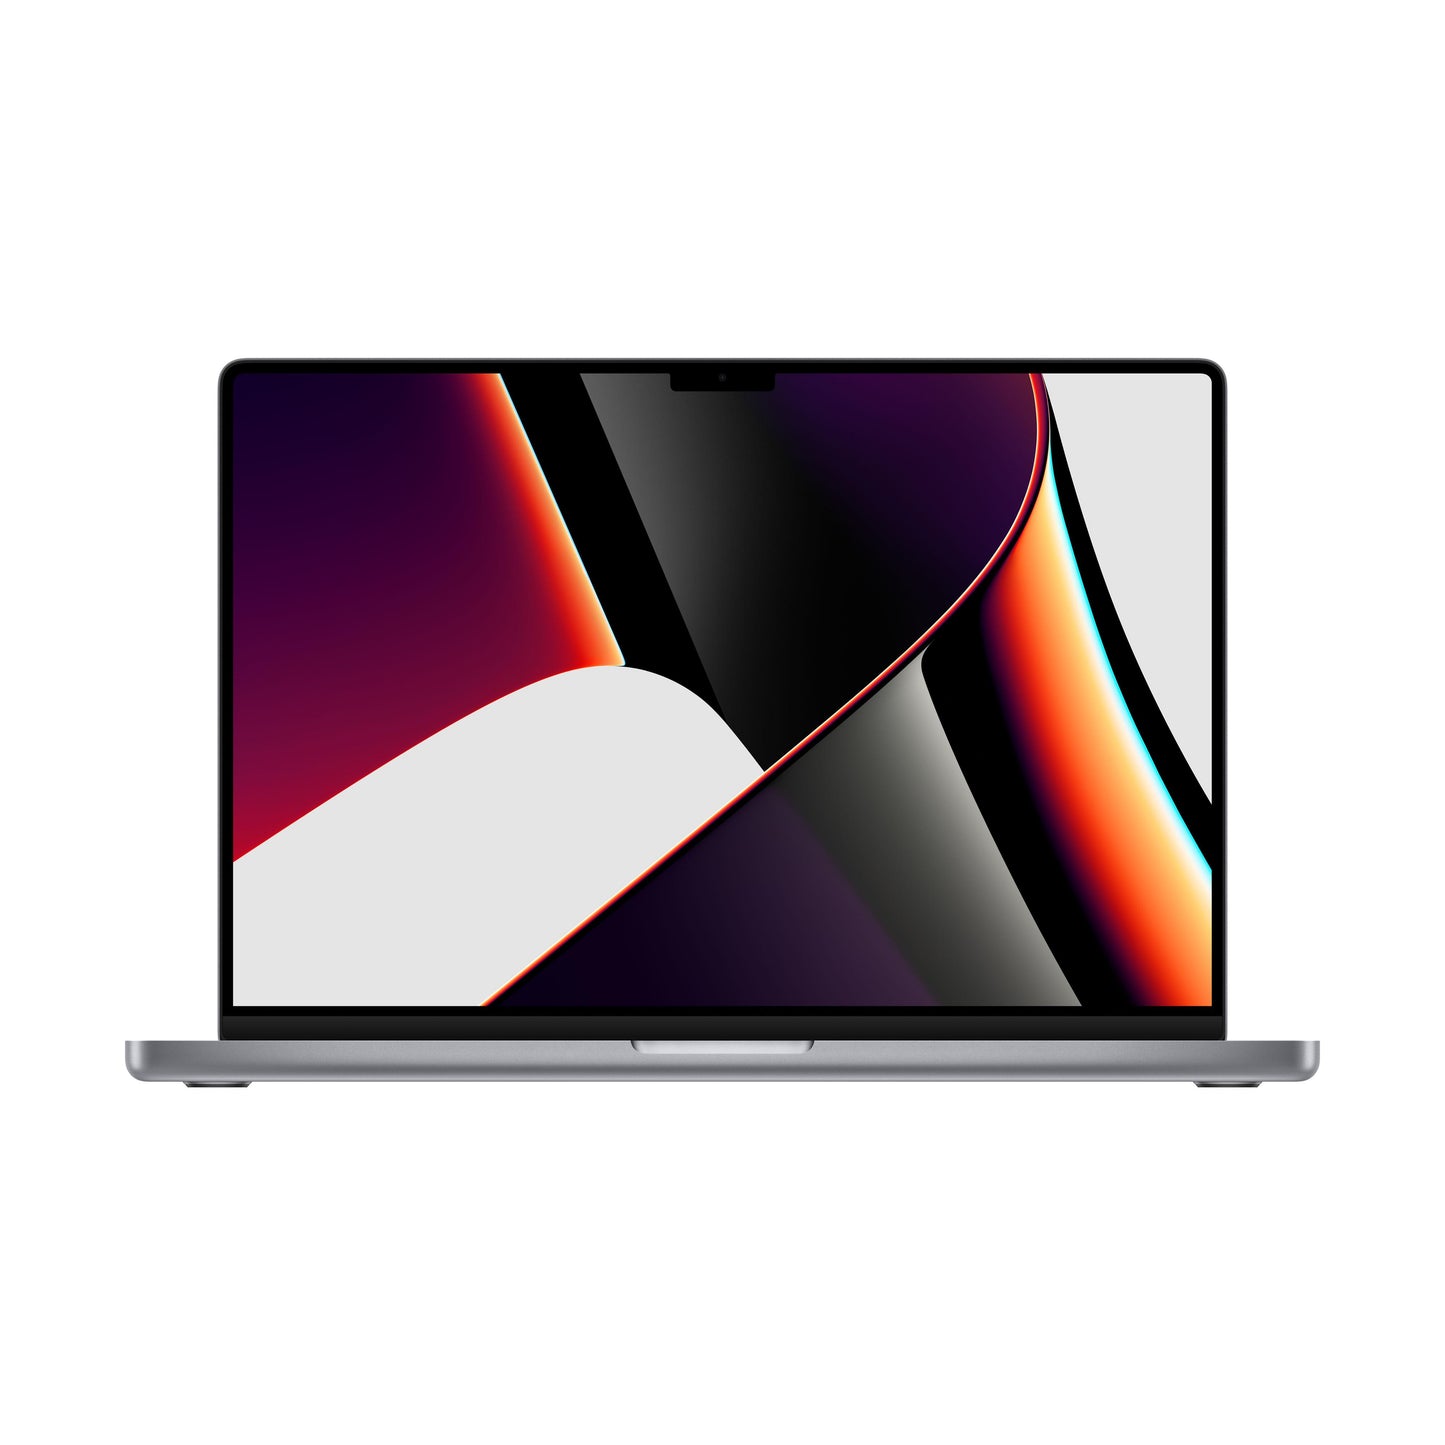 16-inch MacBook Pro: Apple M1 Pro chip with 10_core CPU and 16_core GPU, 512GB SSD - Space Grey